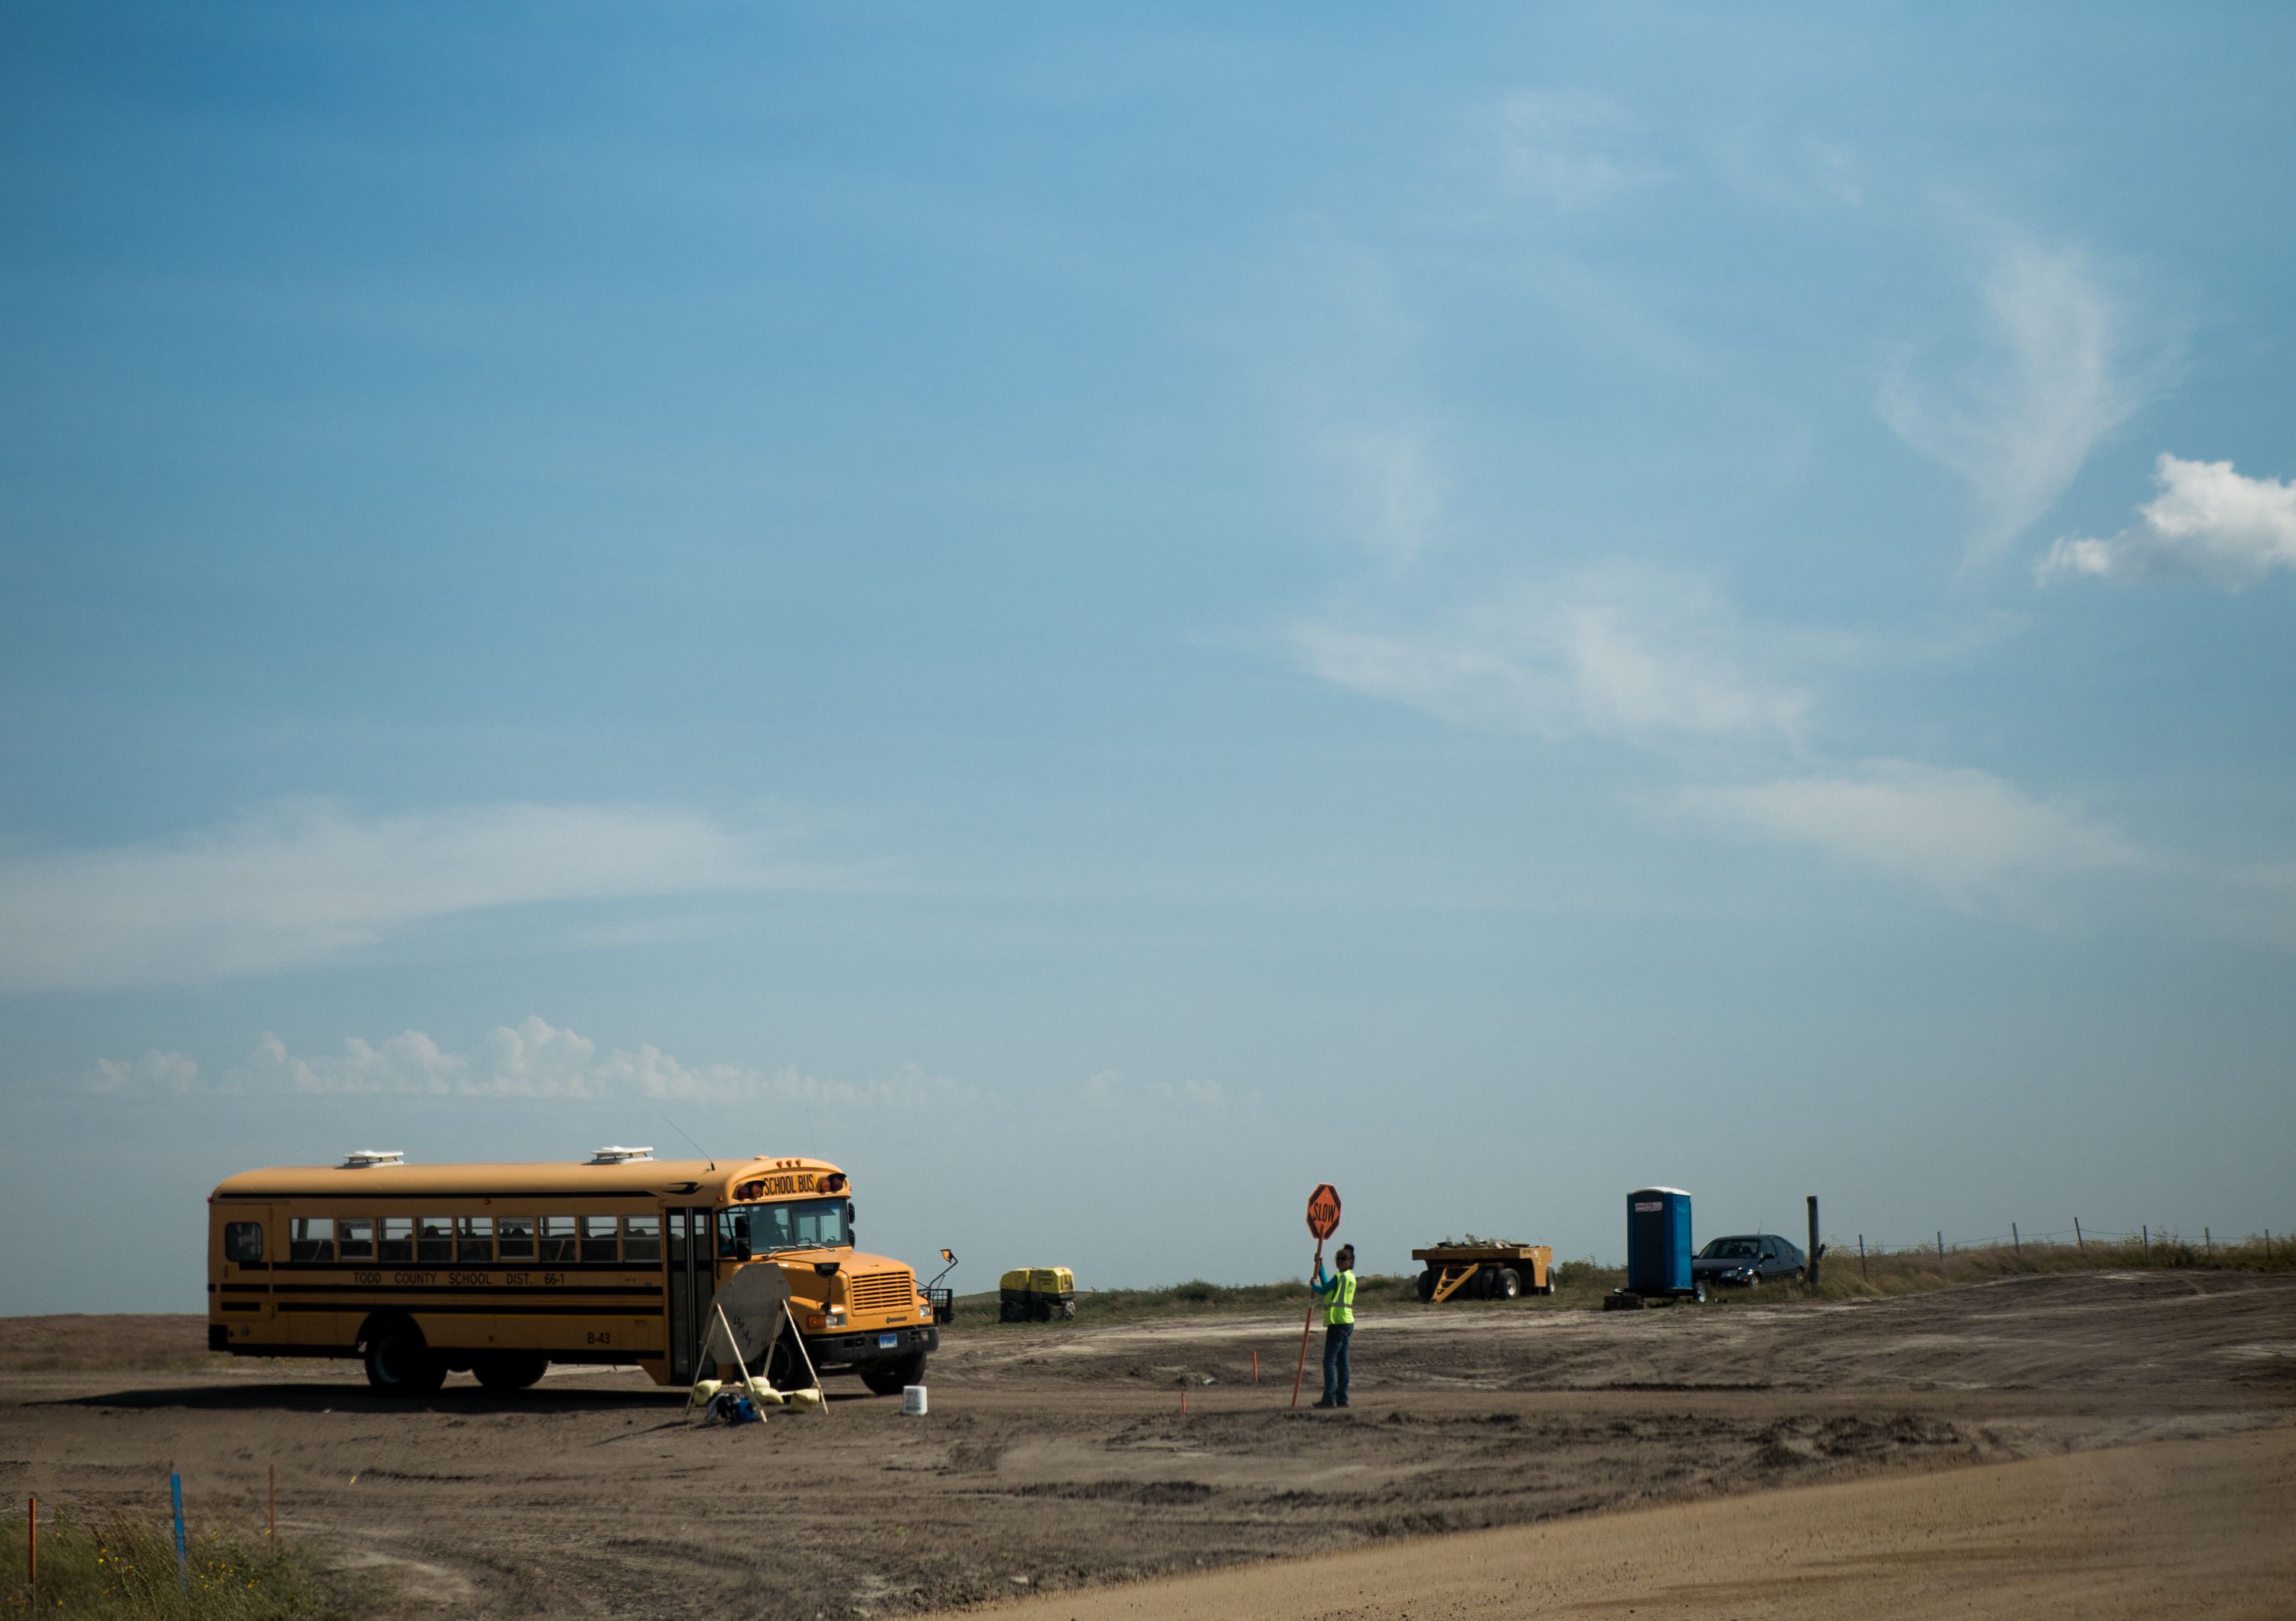 A bus takes children home after school alongside a developing road on August 30, 2018, after school on the Rosebud Indian Reservation in rural South Dakota. Image by Brian Munoz. South Dakota, 2018.